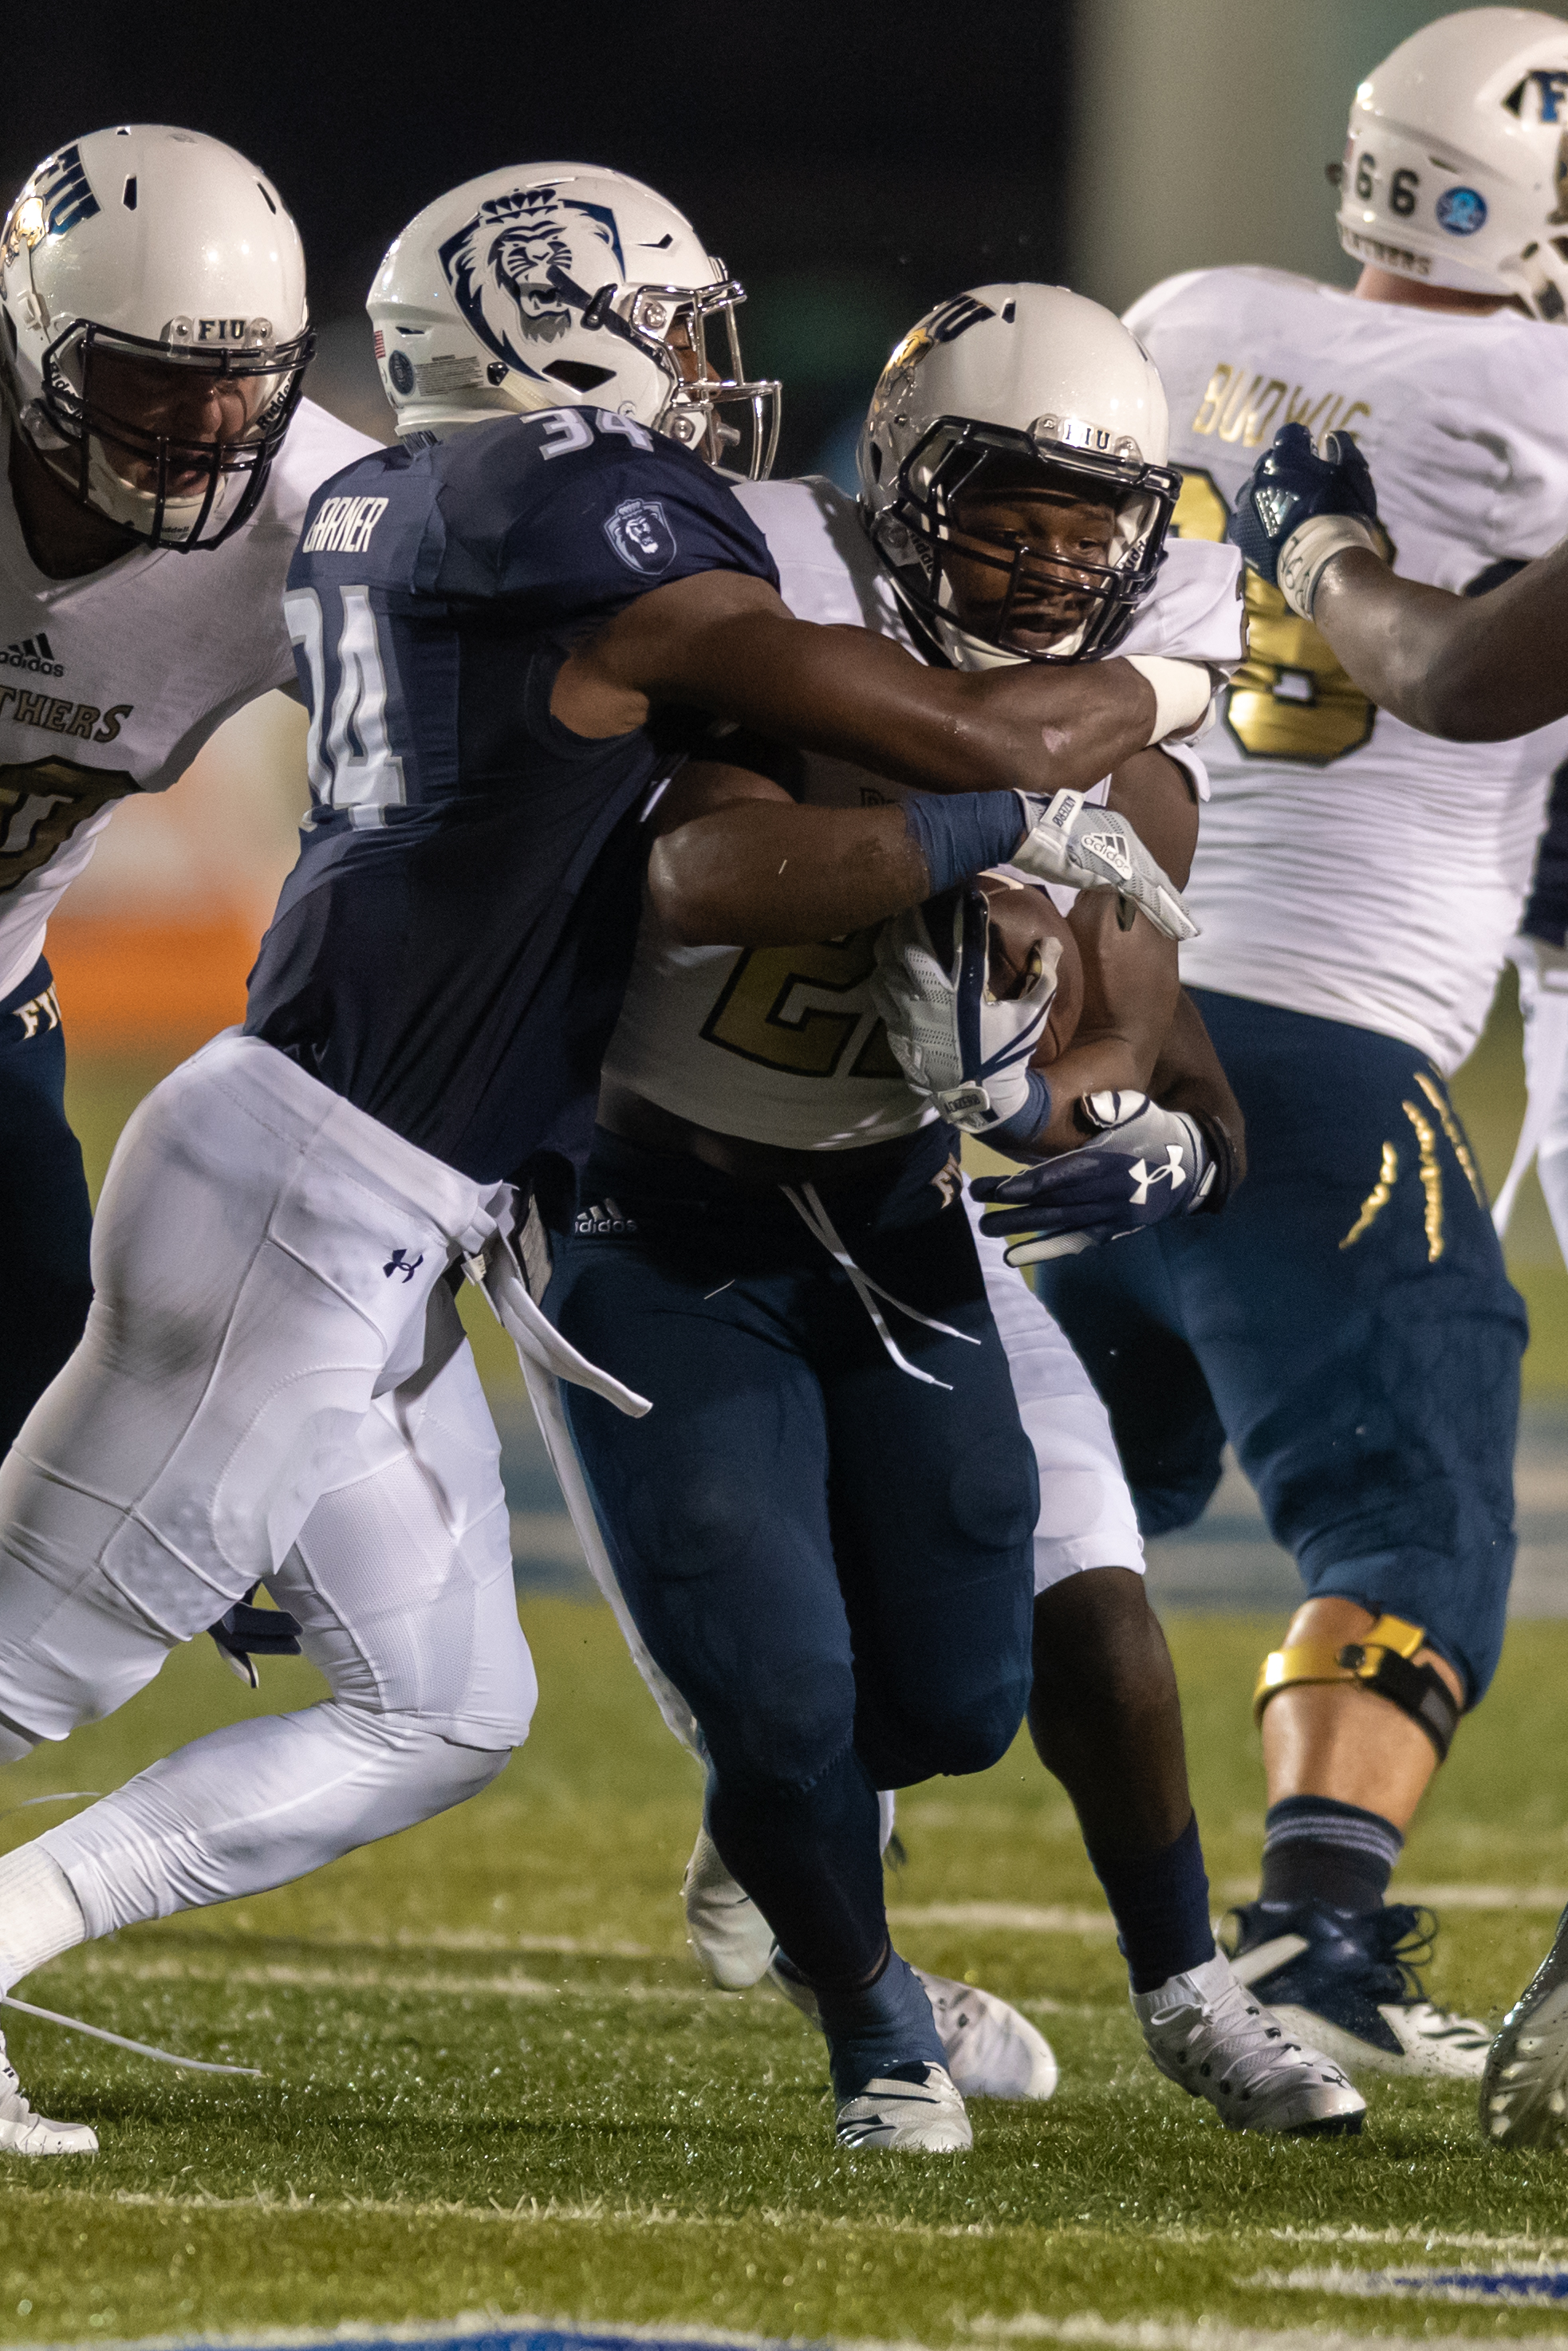  FIU Panthers running back Shawndarrius Phillips (22) runs the ball under pressure from Old Dominion Monarchs cornerback Joe Joe Headen (24) during the Saturday, Sept. 8, 2018 game held at Old Dominion University in Norfolk, Virginia. The Monarchs le